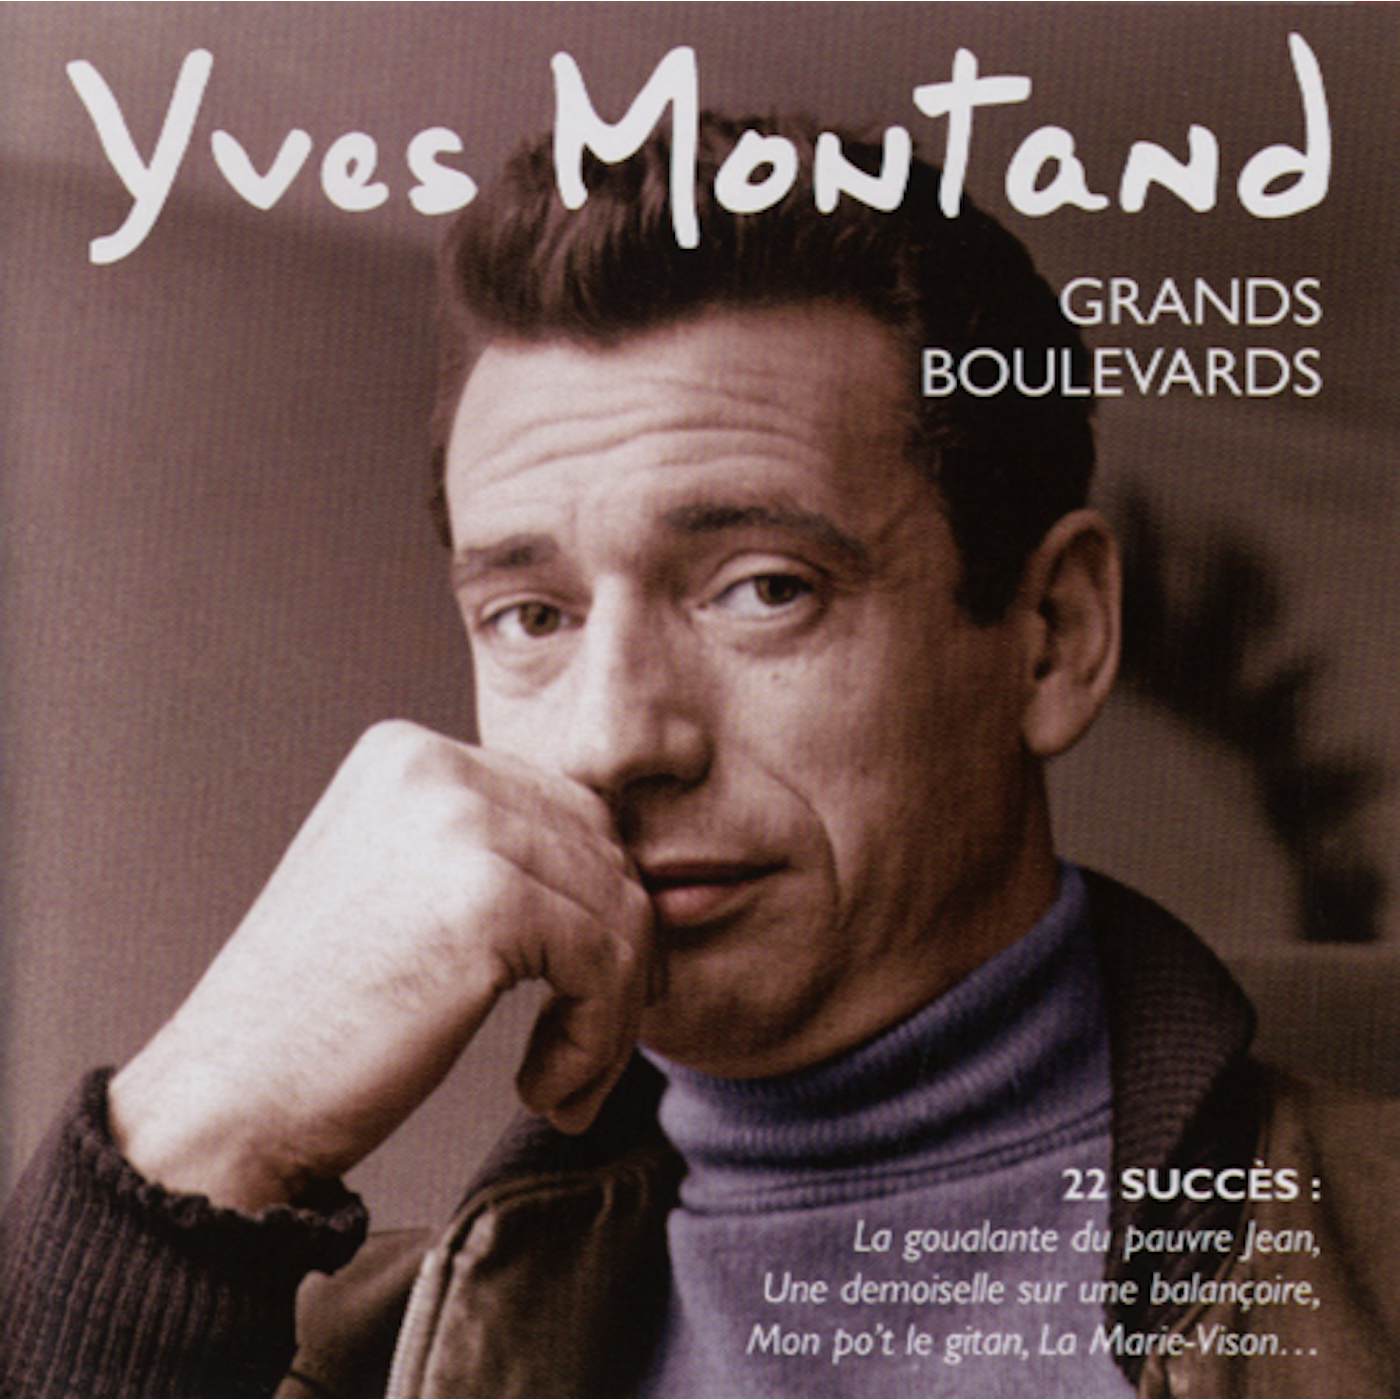 Yves Montand GRANDS BOULEVARDS CD